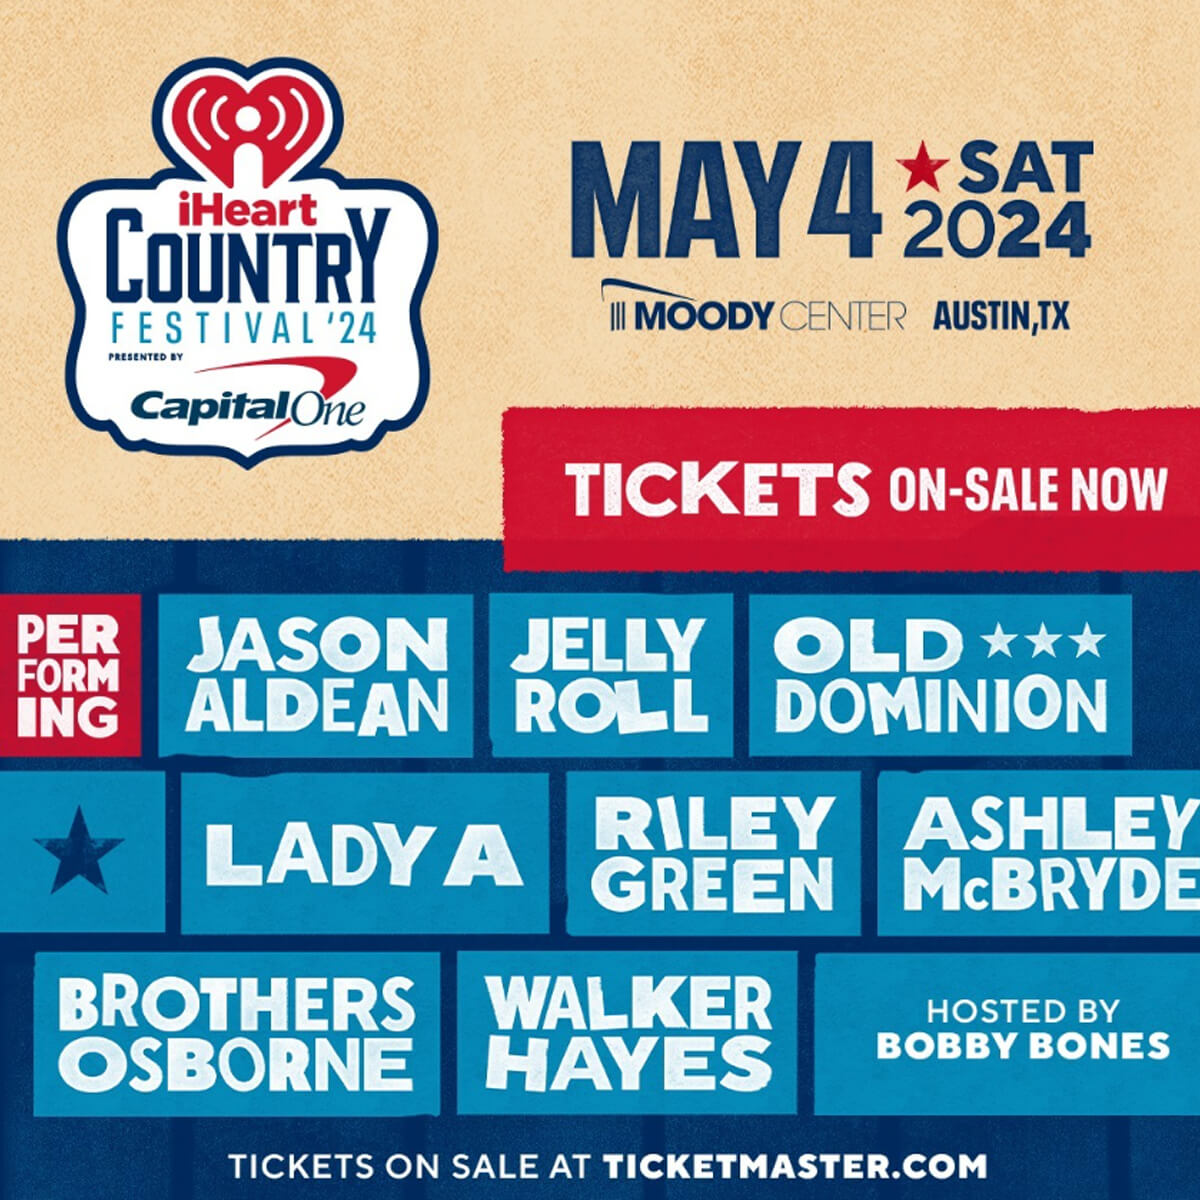 iHeart Country Fest Square